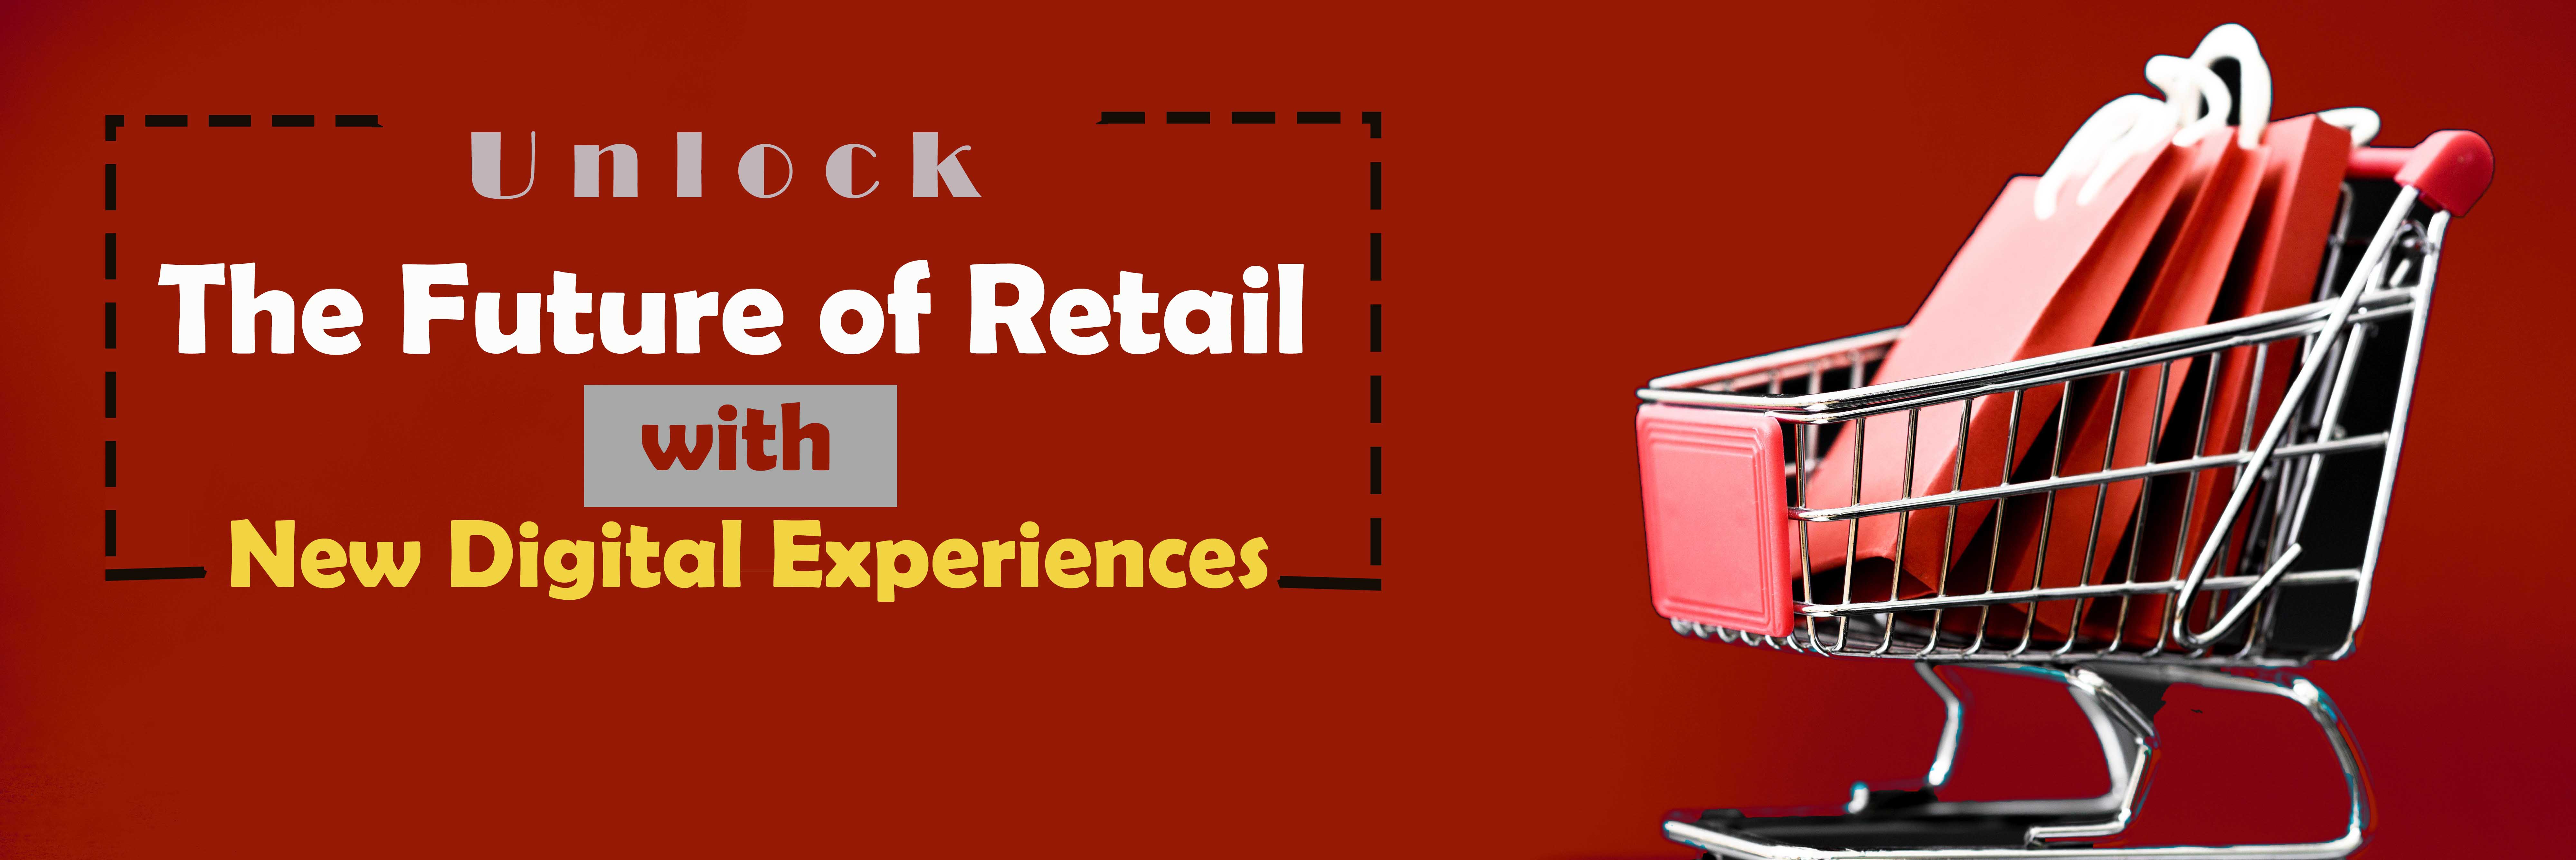 Unlock the Future of Retail with New Digital Experiences